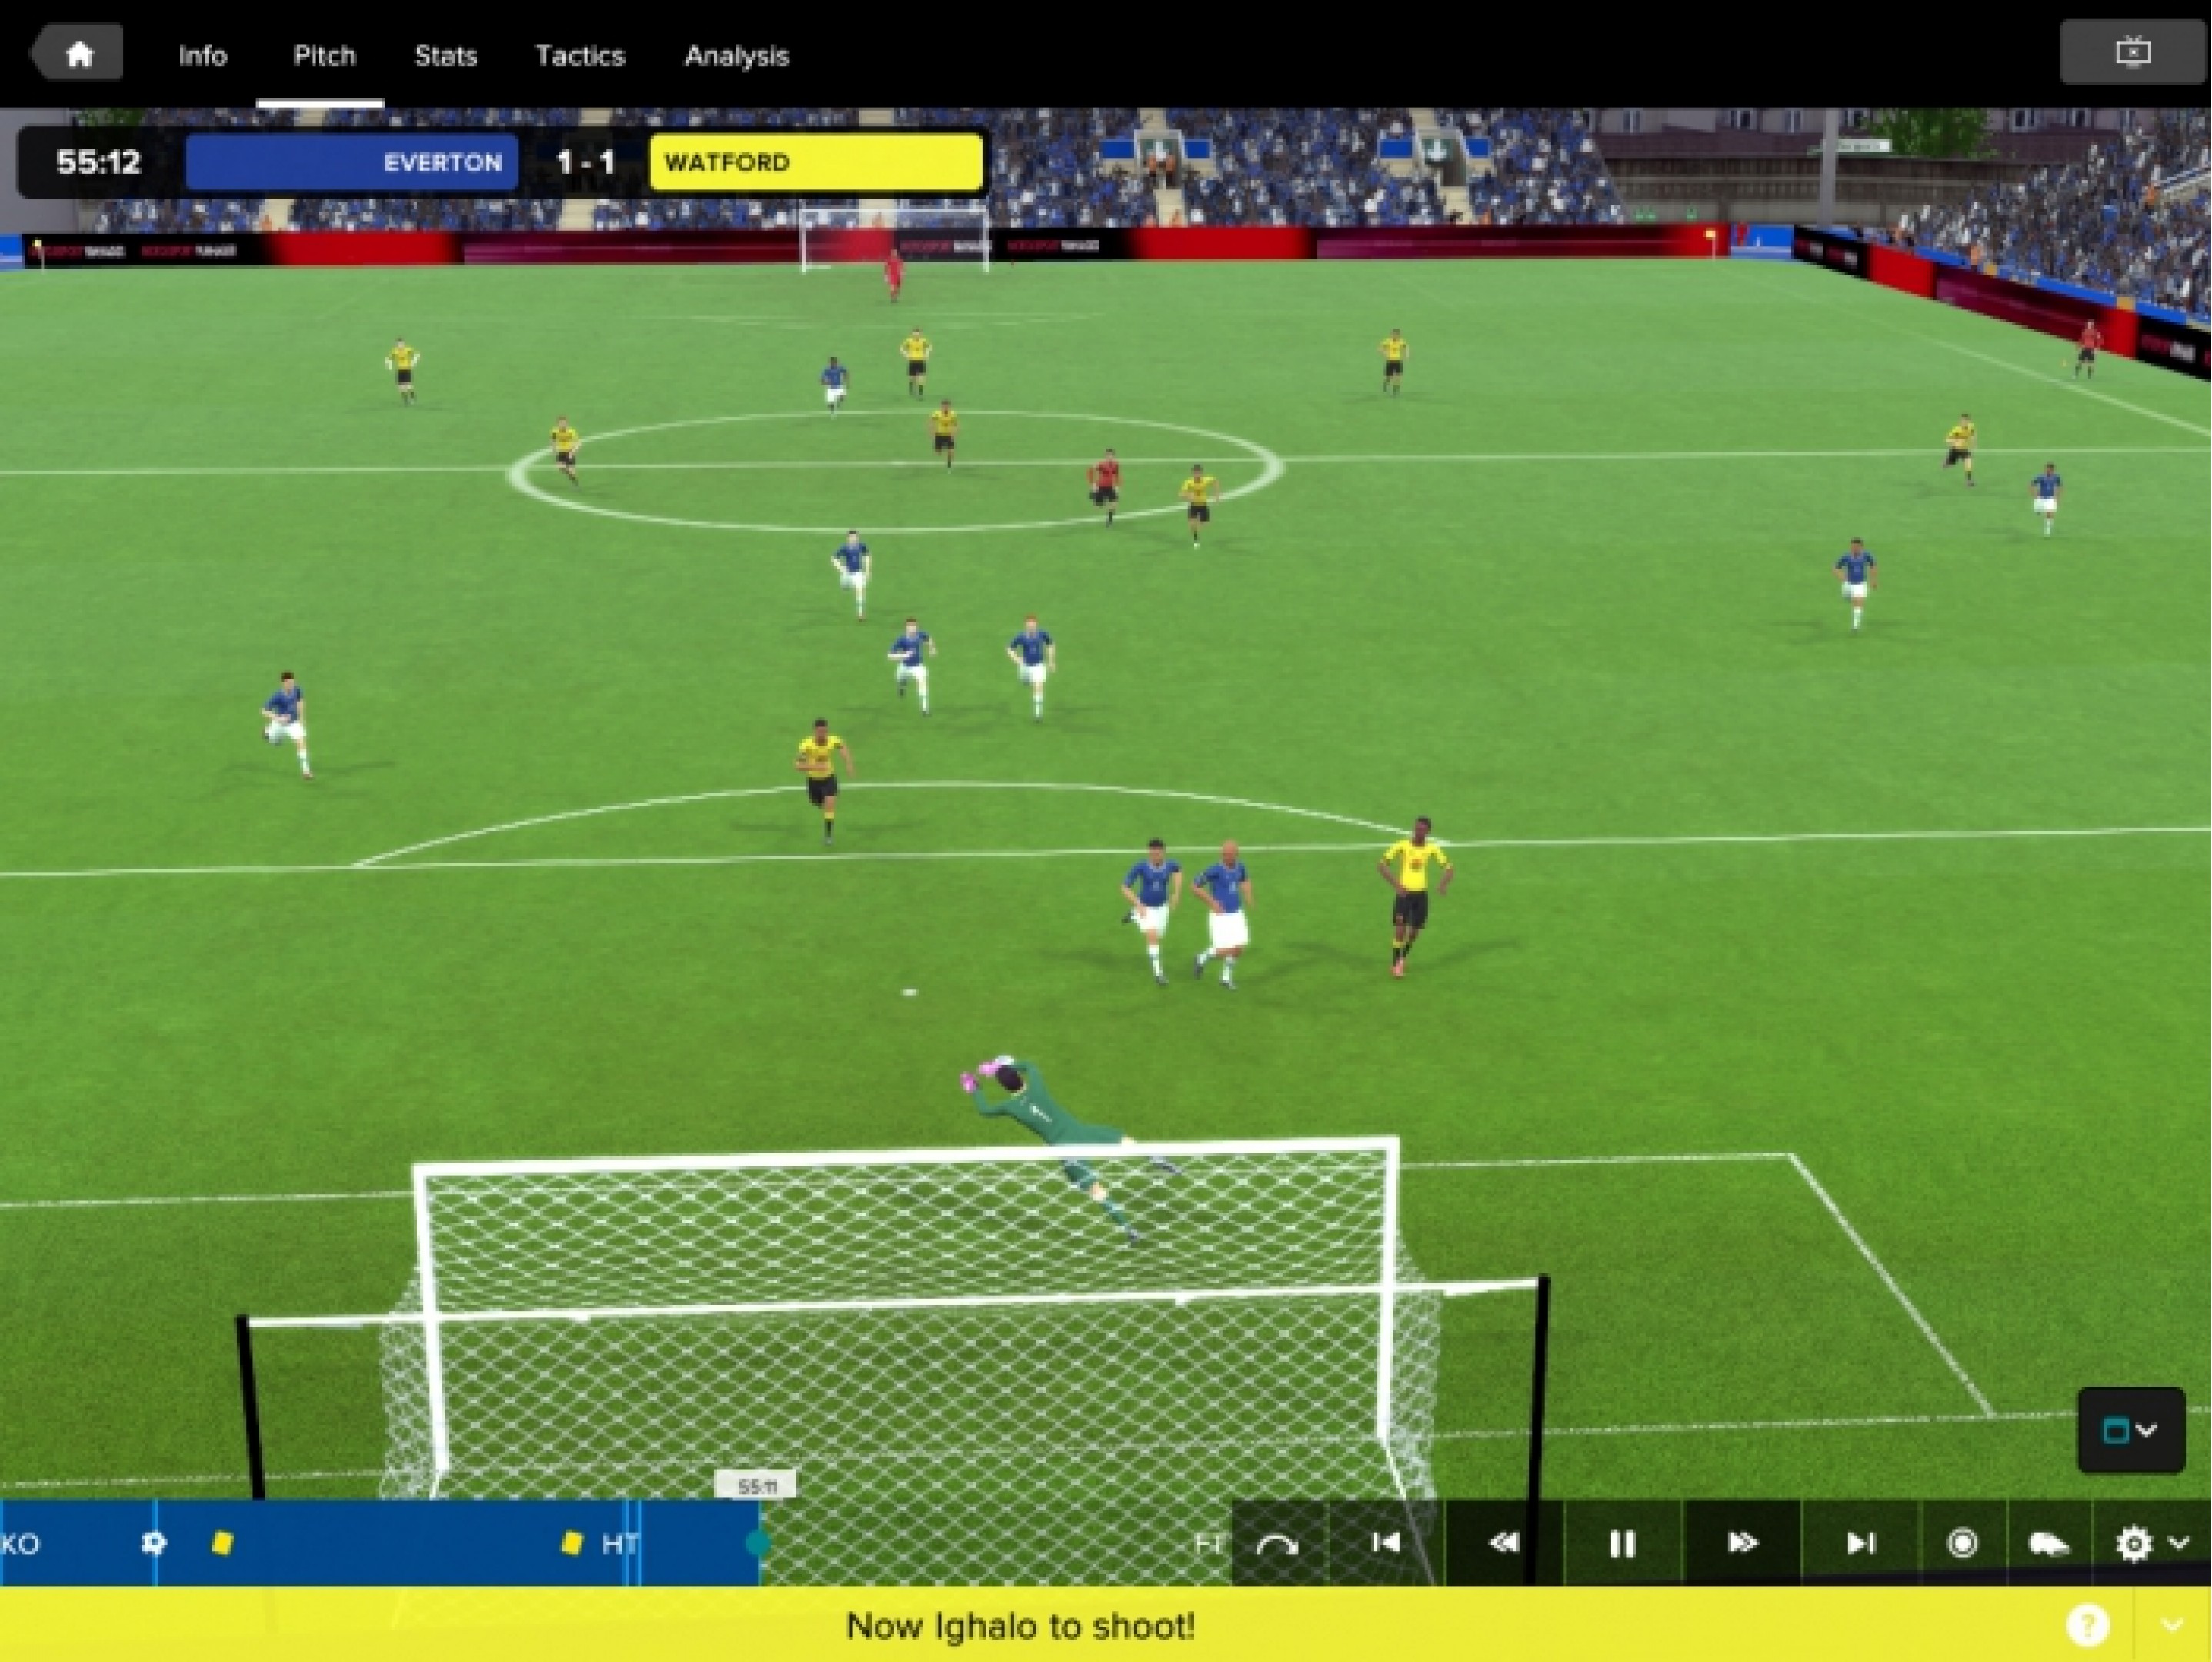 football manager 2017 mac download free full version